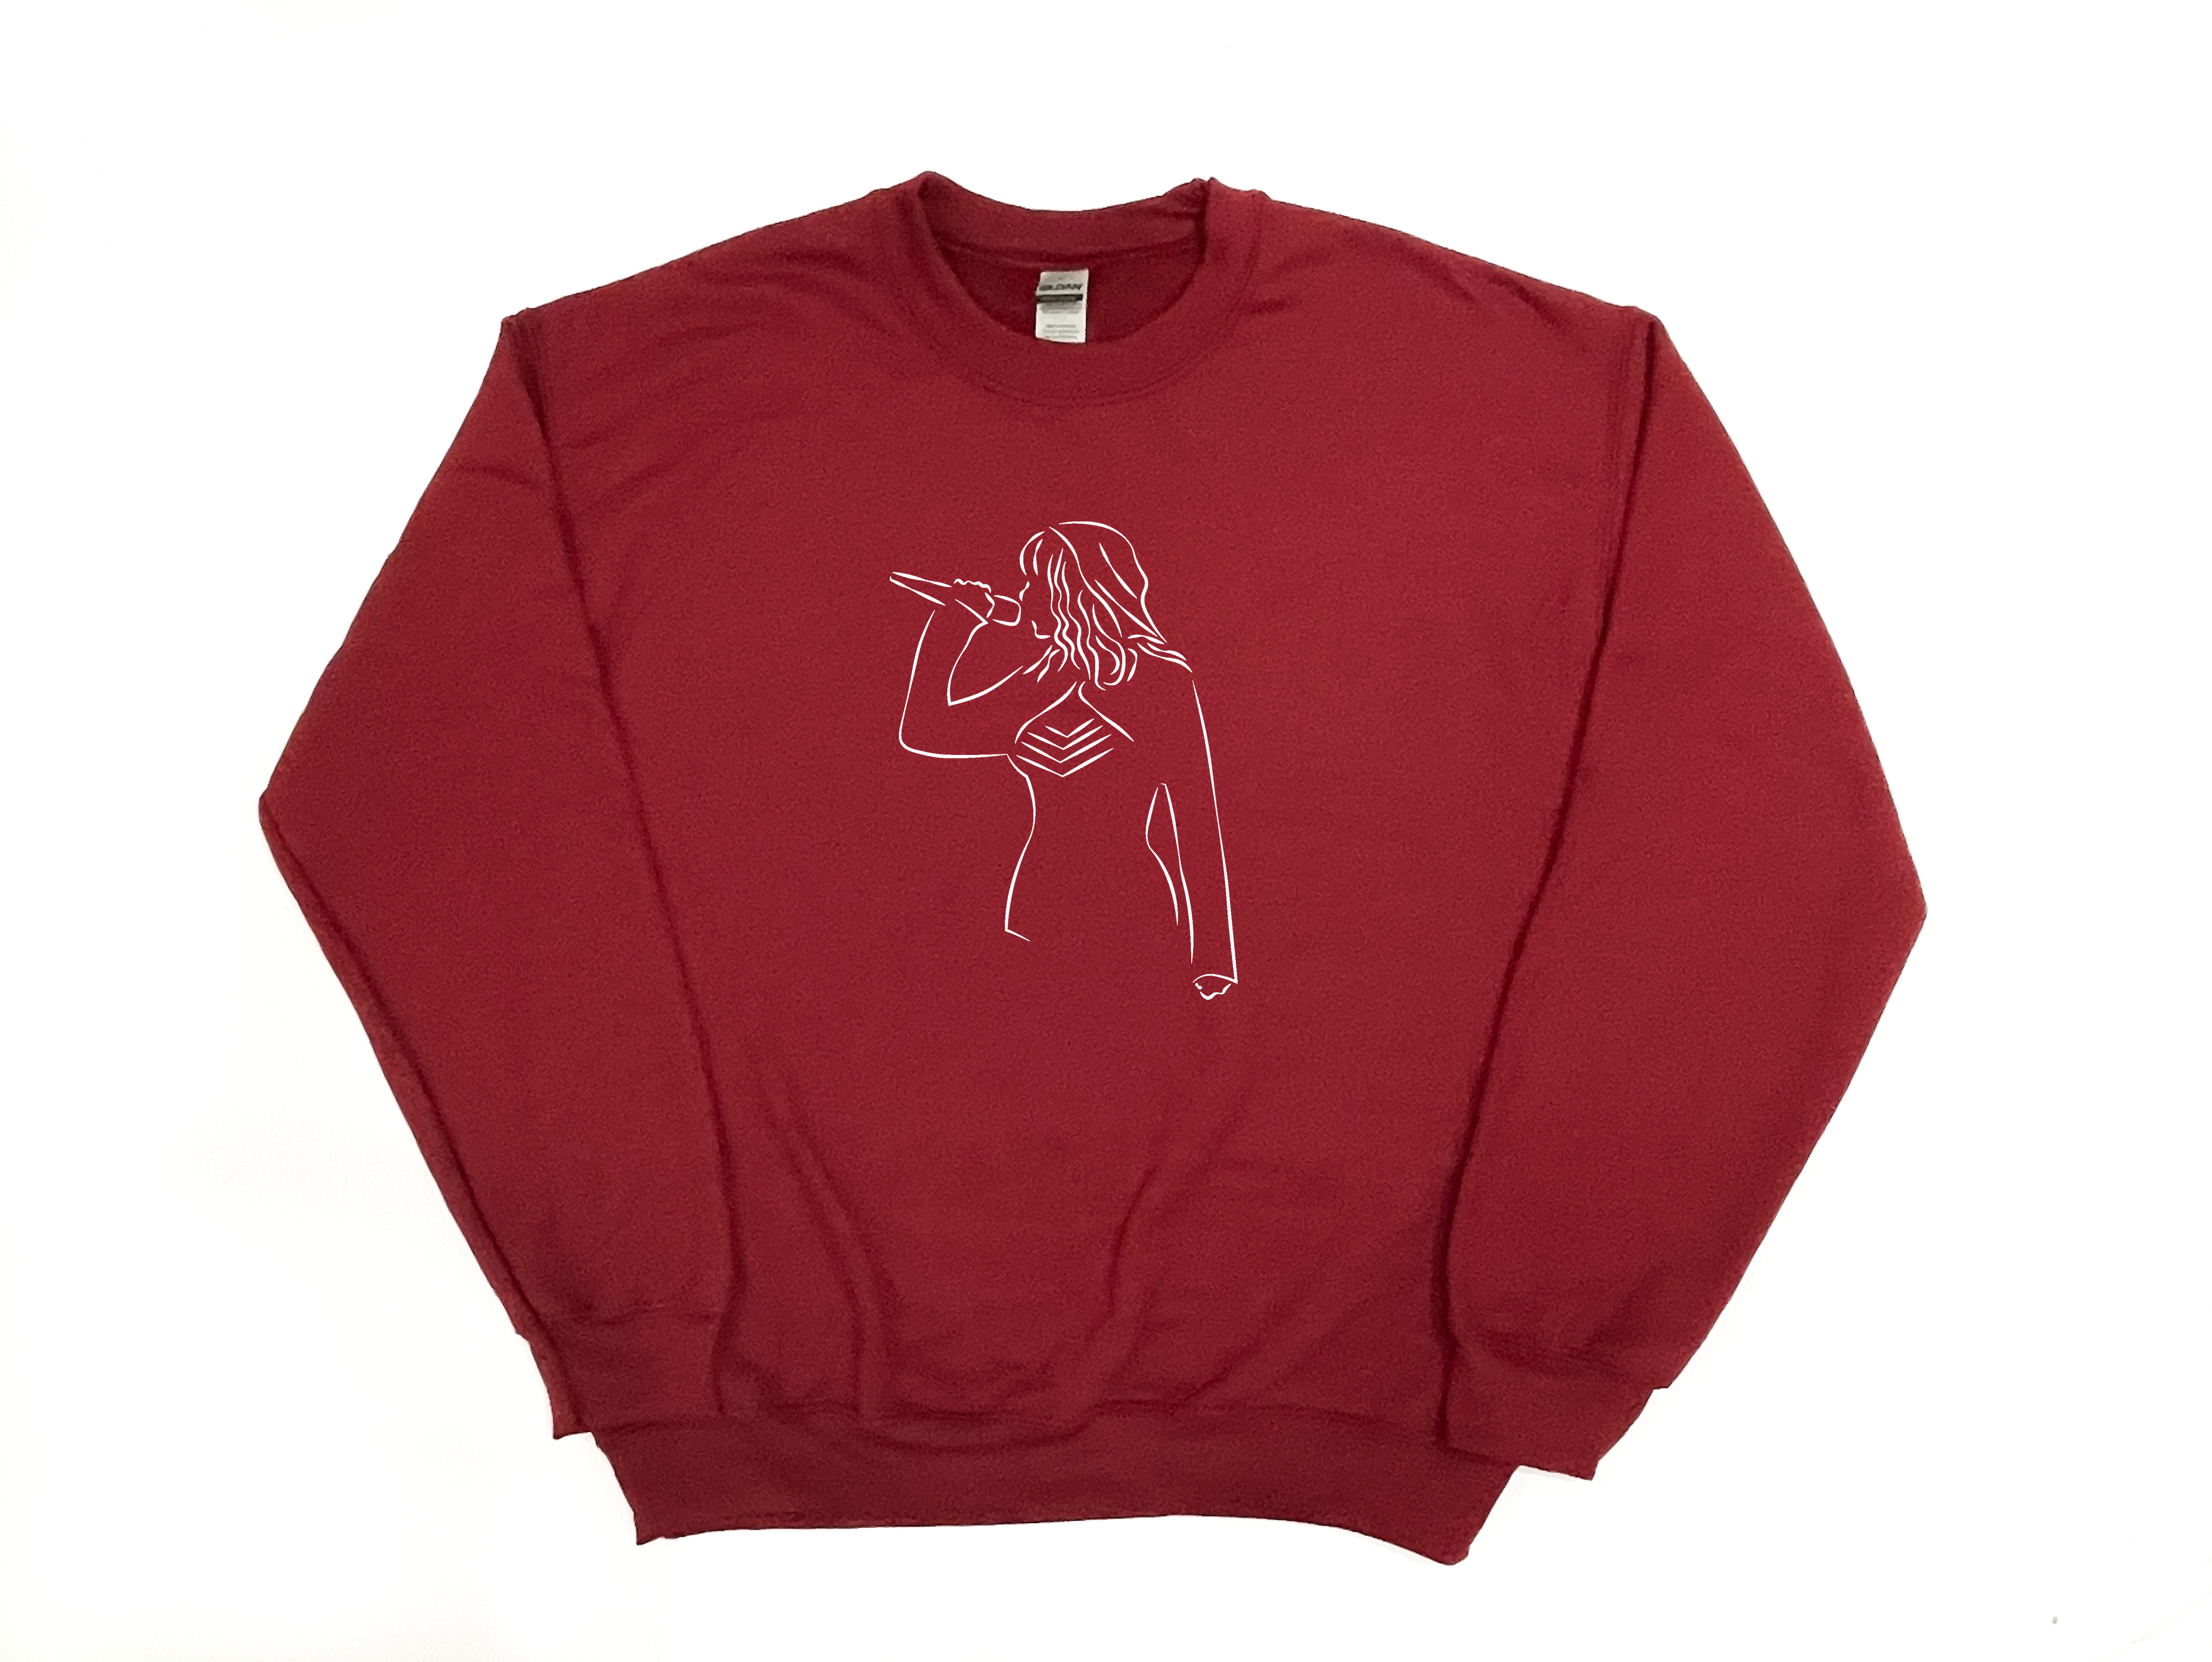 MIDDLE OF THE NIGHT CREWNECK